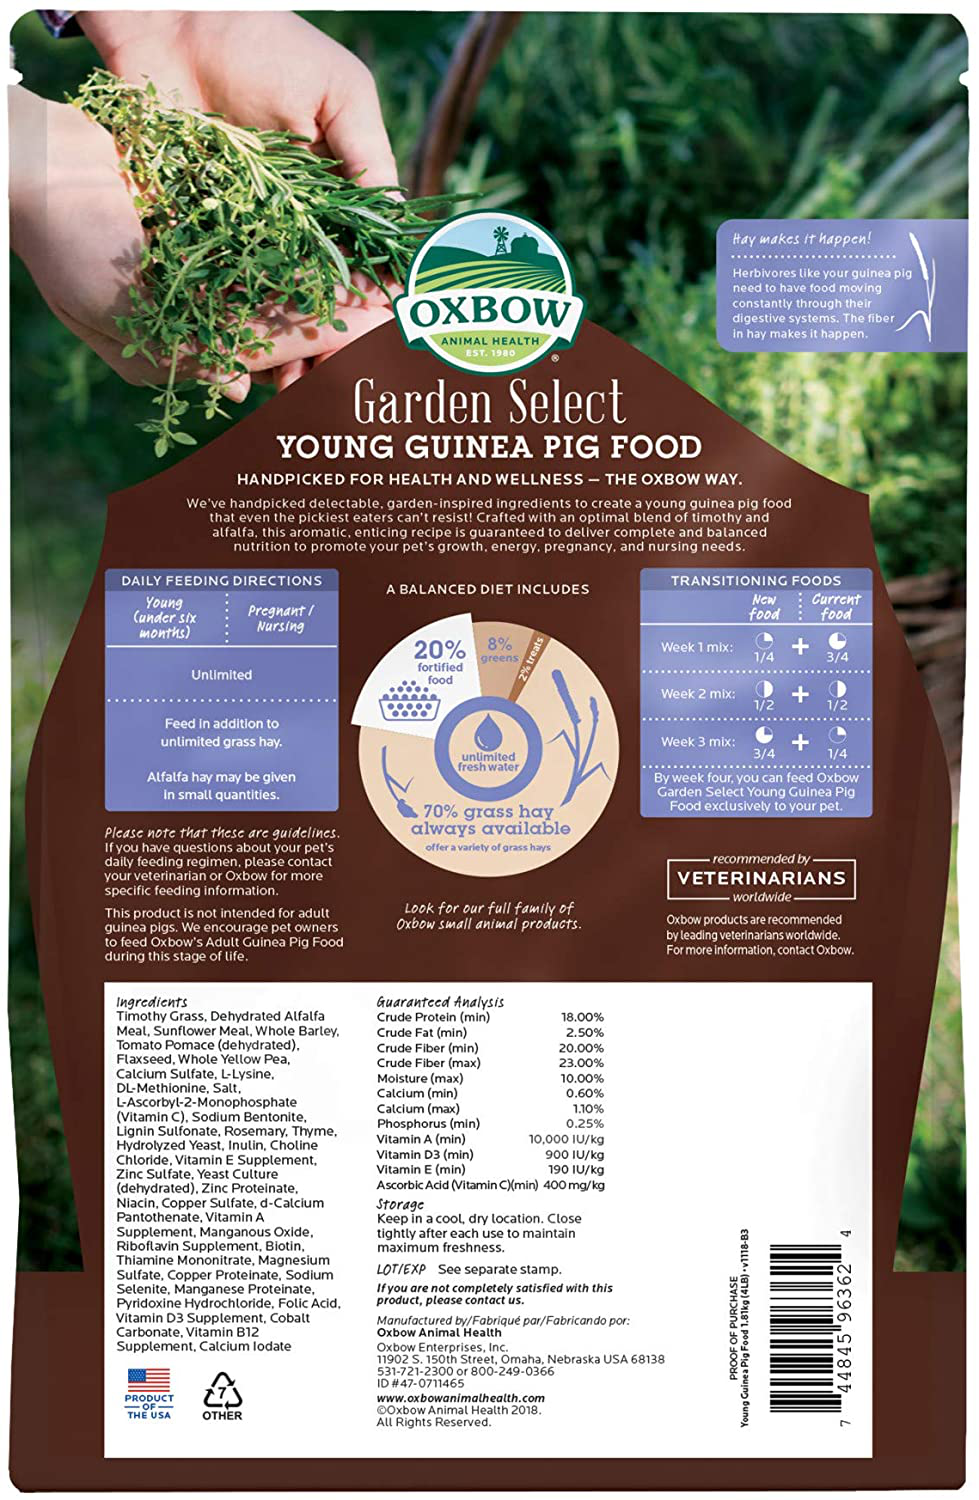 Oxbow Animal Health Garden Select Young Guinea Pig Food, Garden-Inspired Recipe for Young Guinea Pigs, No Soy or Wheat, Non-Gmo, Made in the USA, 4 Pound Bag